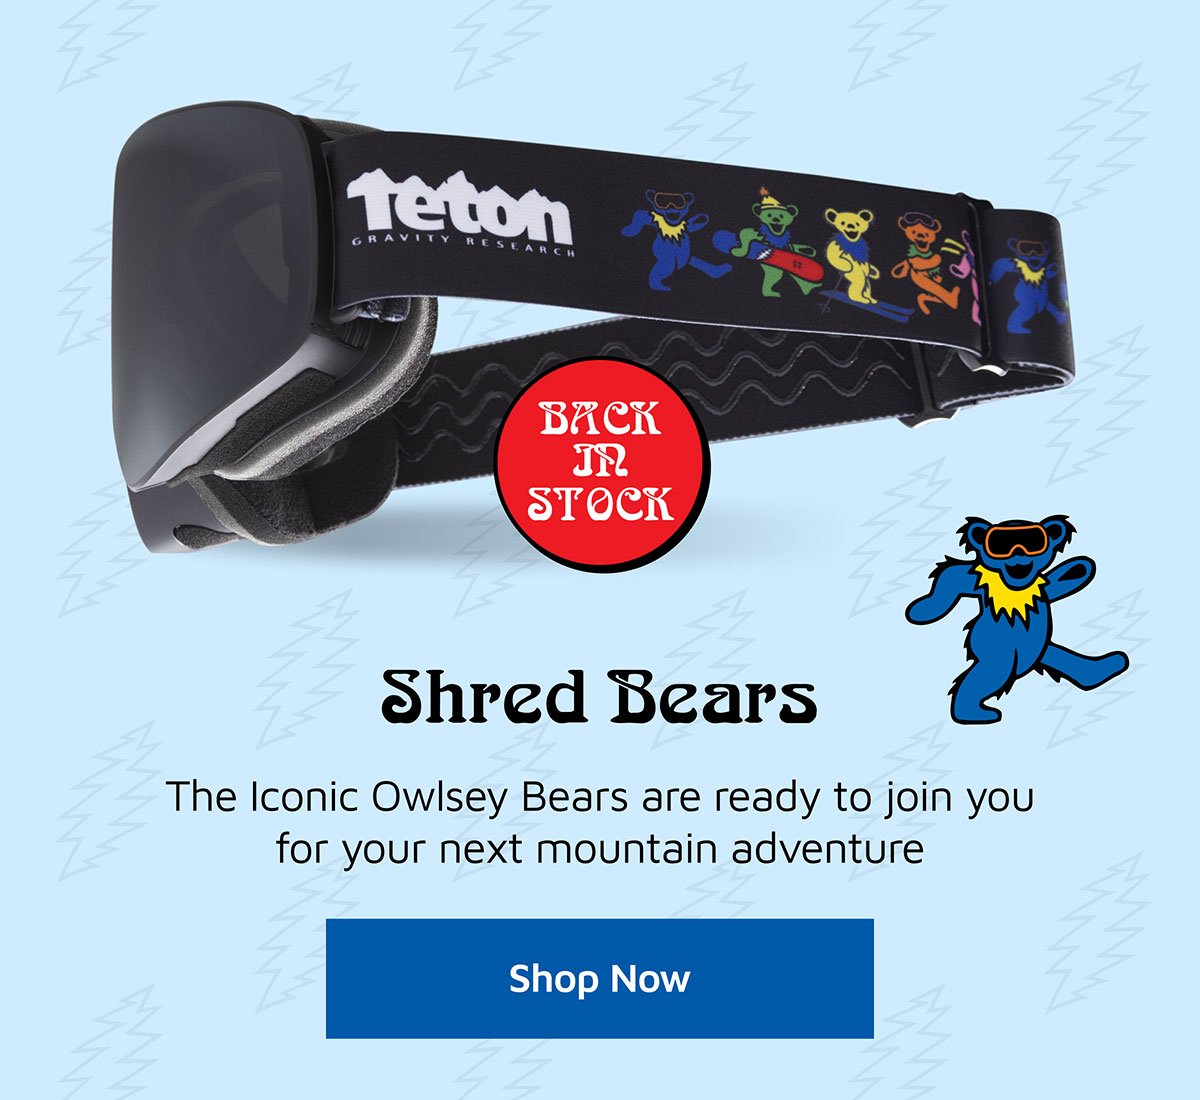 Shred Bears. The Iconic Owlsey Bears are ready to join you for your next mountain adventure